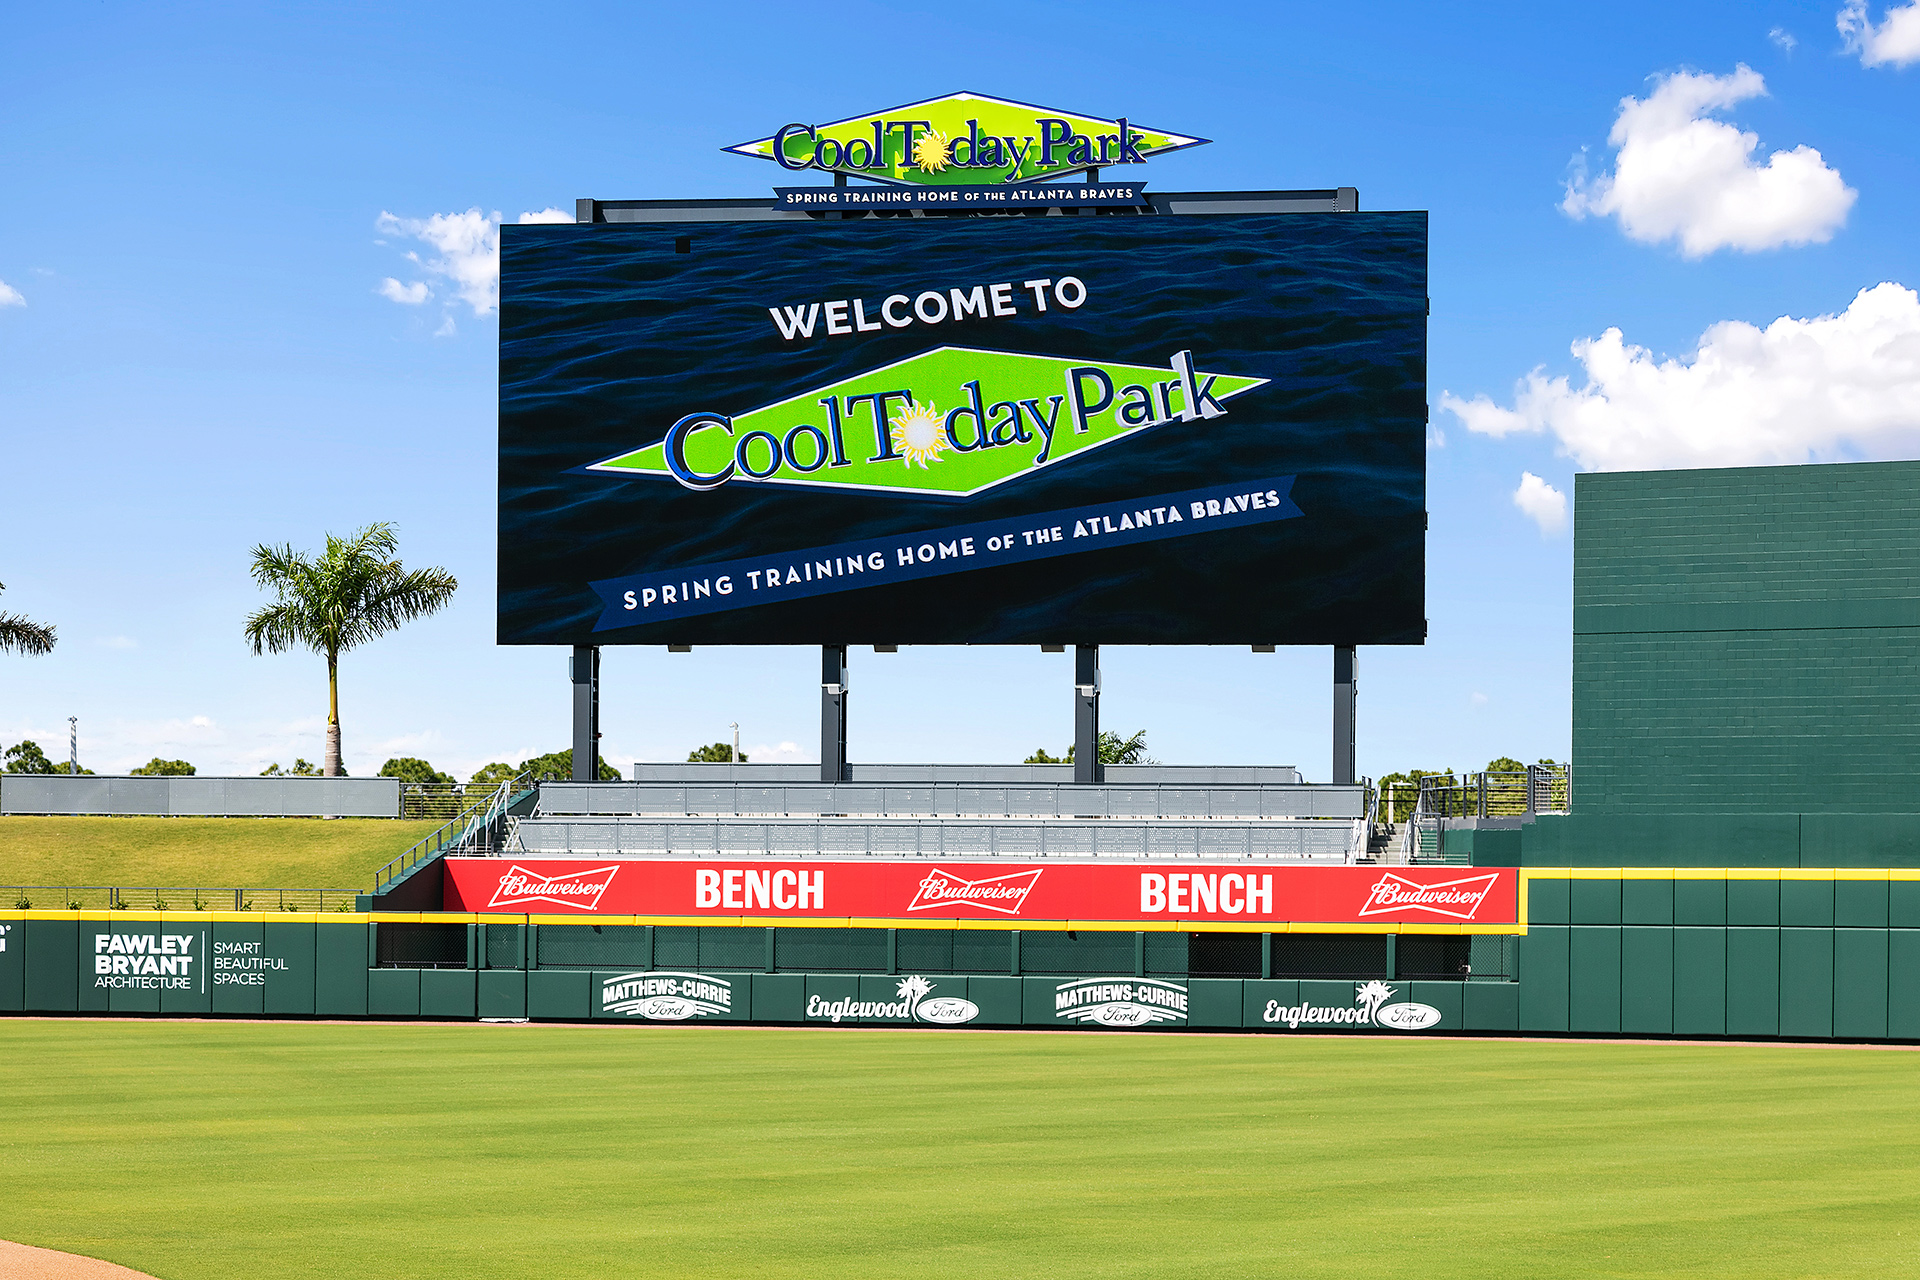 Atlanta Braves Spring Training Facility - Commercial Plumbing by